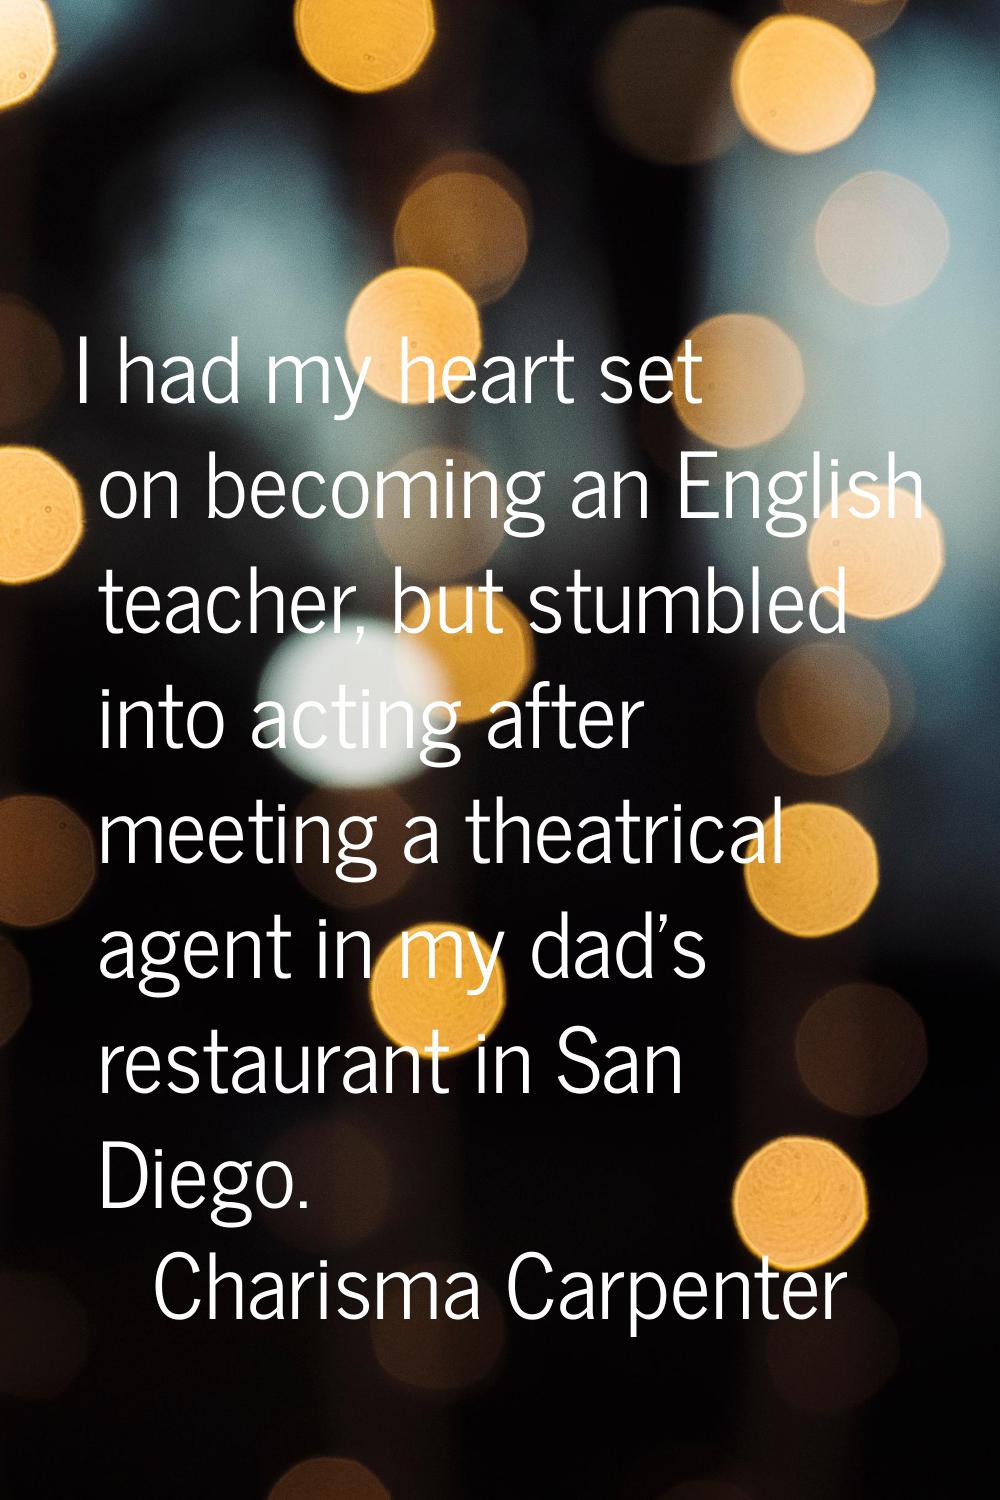 I had my heart set on becoming an English teacher, but stumbled into acting after meeting a theatri